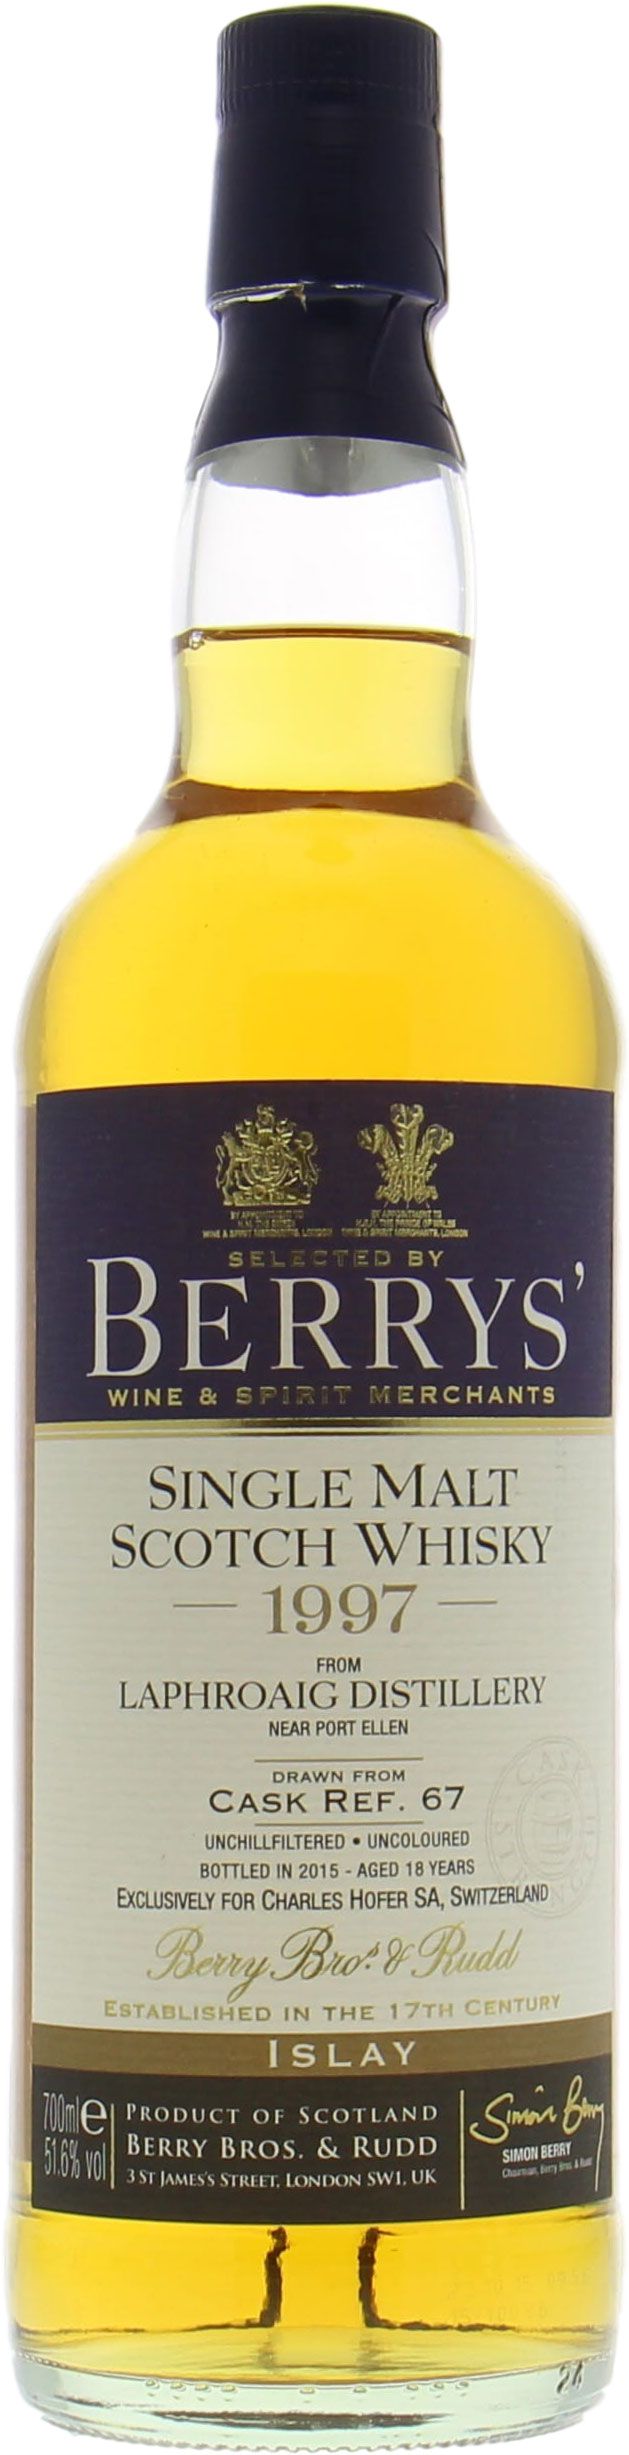 Laphroaig - 18 Years Berry's Own Selection for Charles Hofer Cask 67 51.6% 1997 Perfect